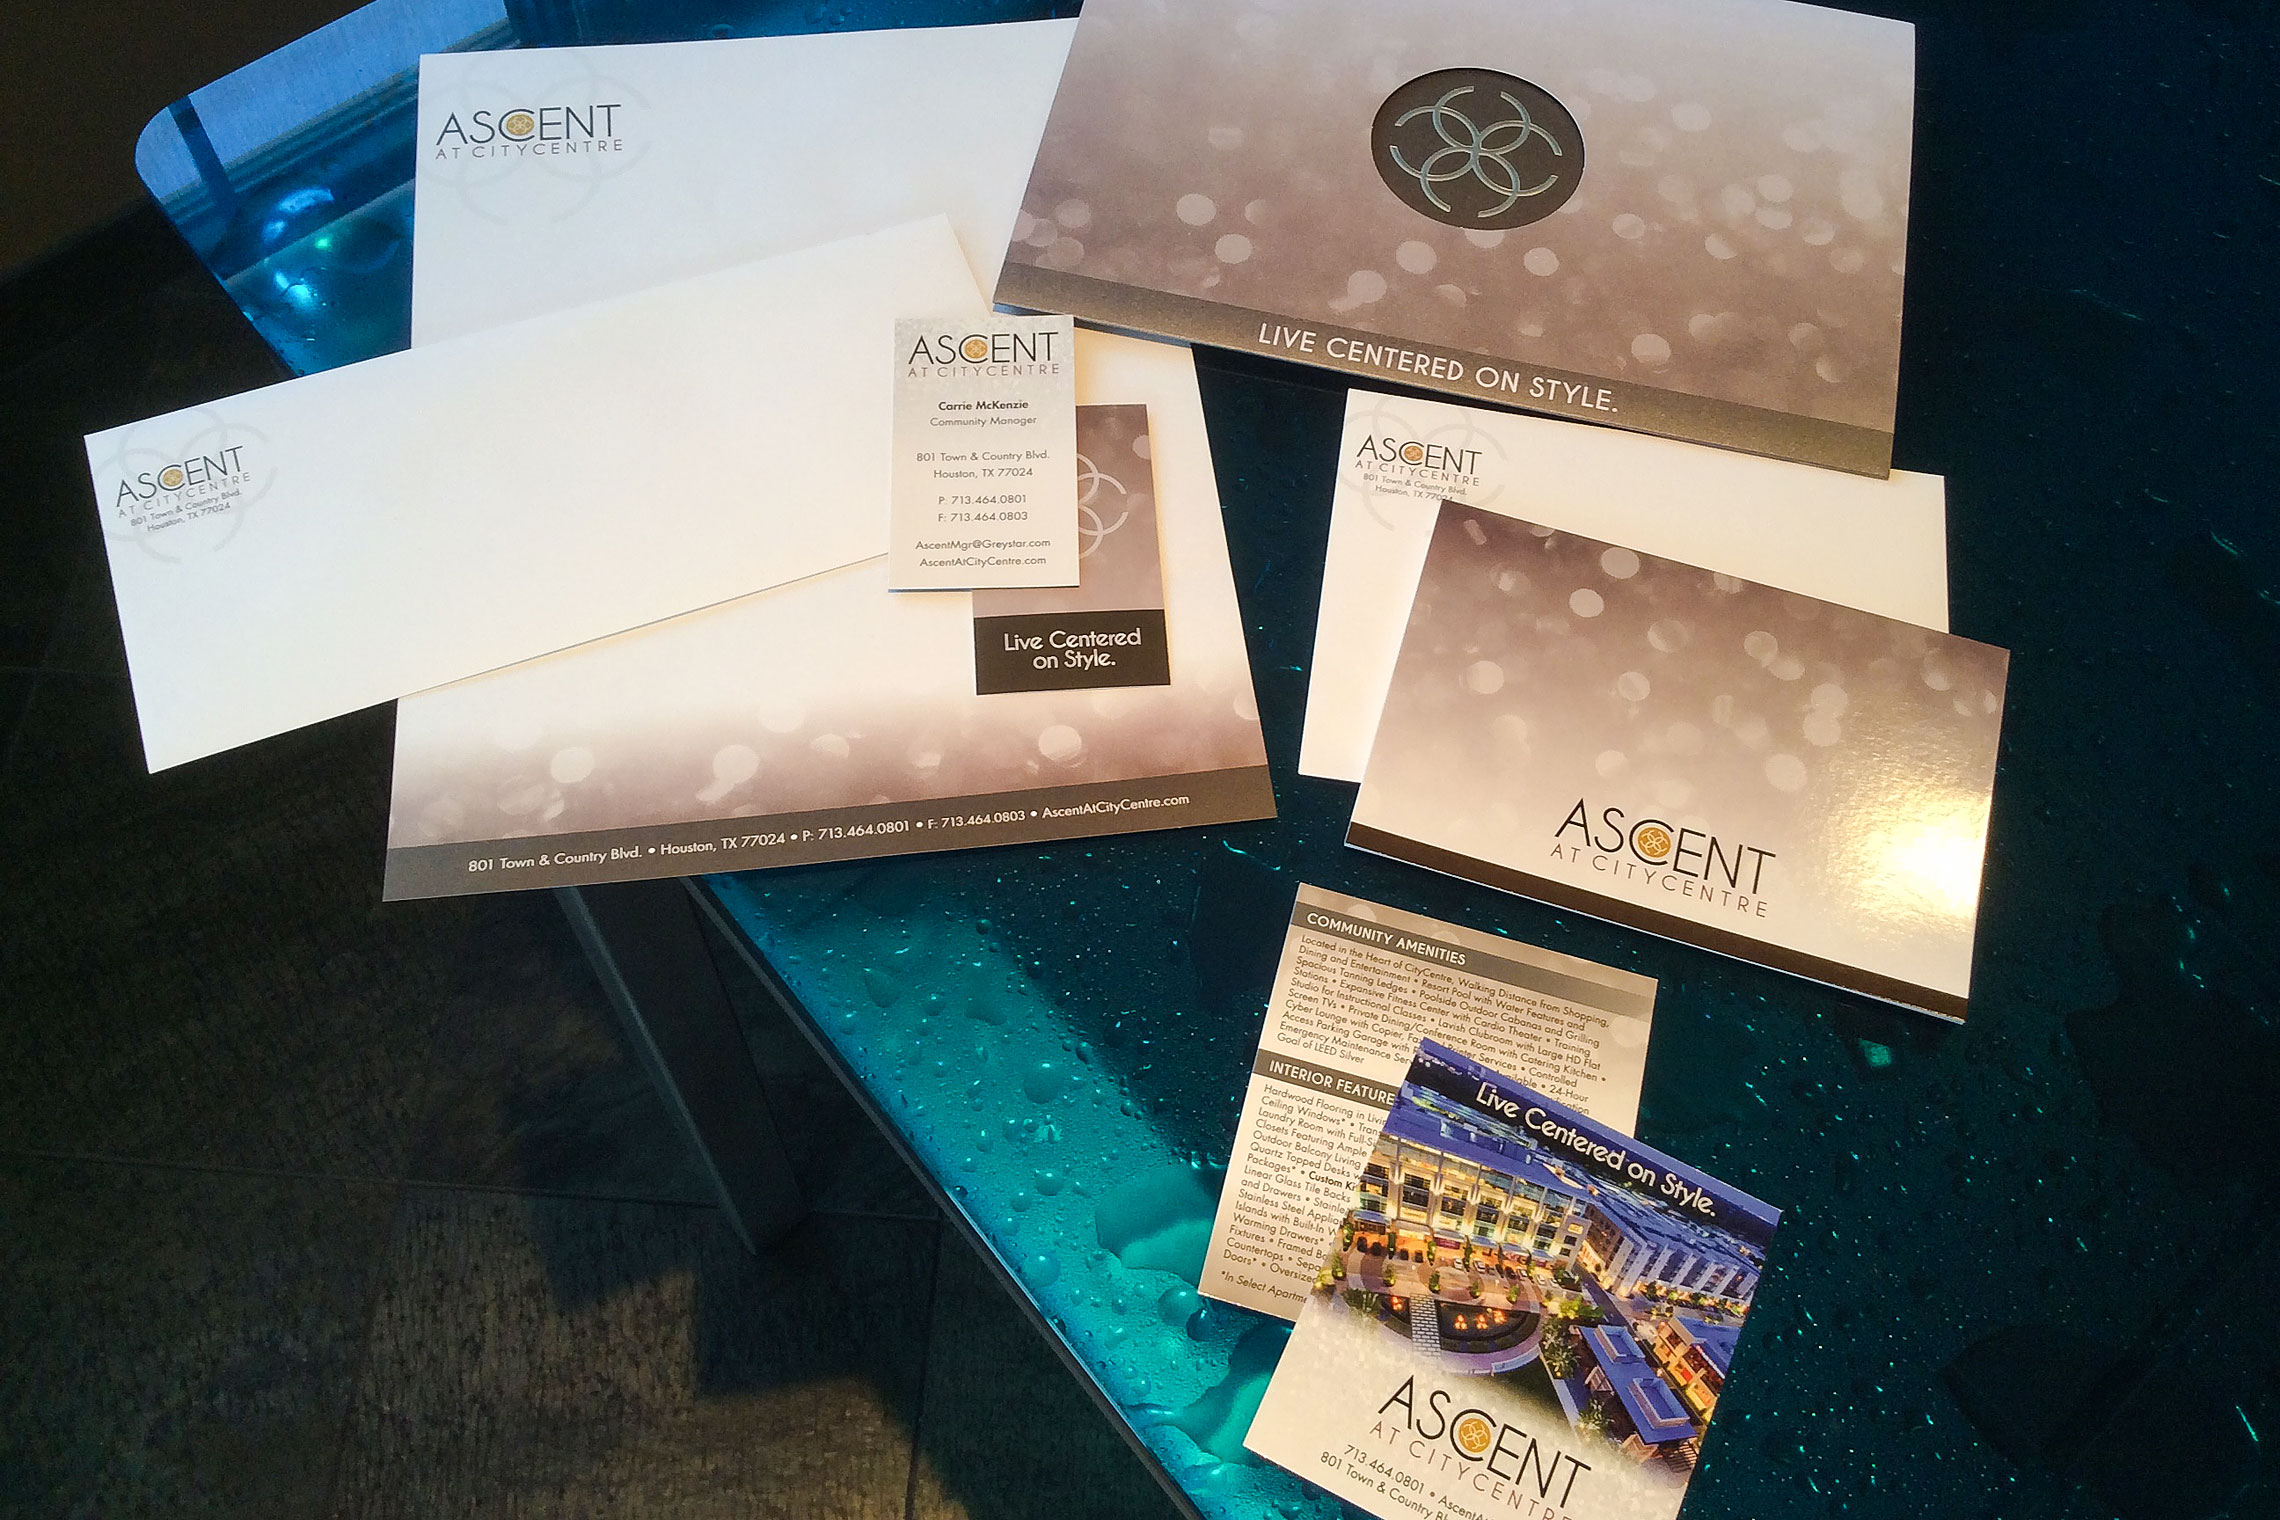 Ascent at CITYCENTRE Collateral - Brochure, Thank You Card, Promo Card, Business Card, Letterhead and Envelope